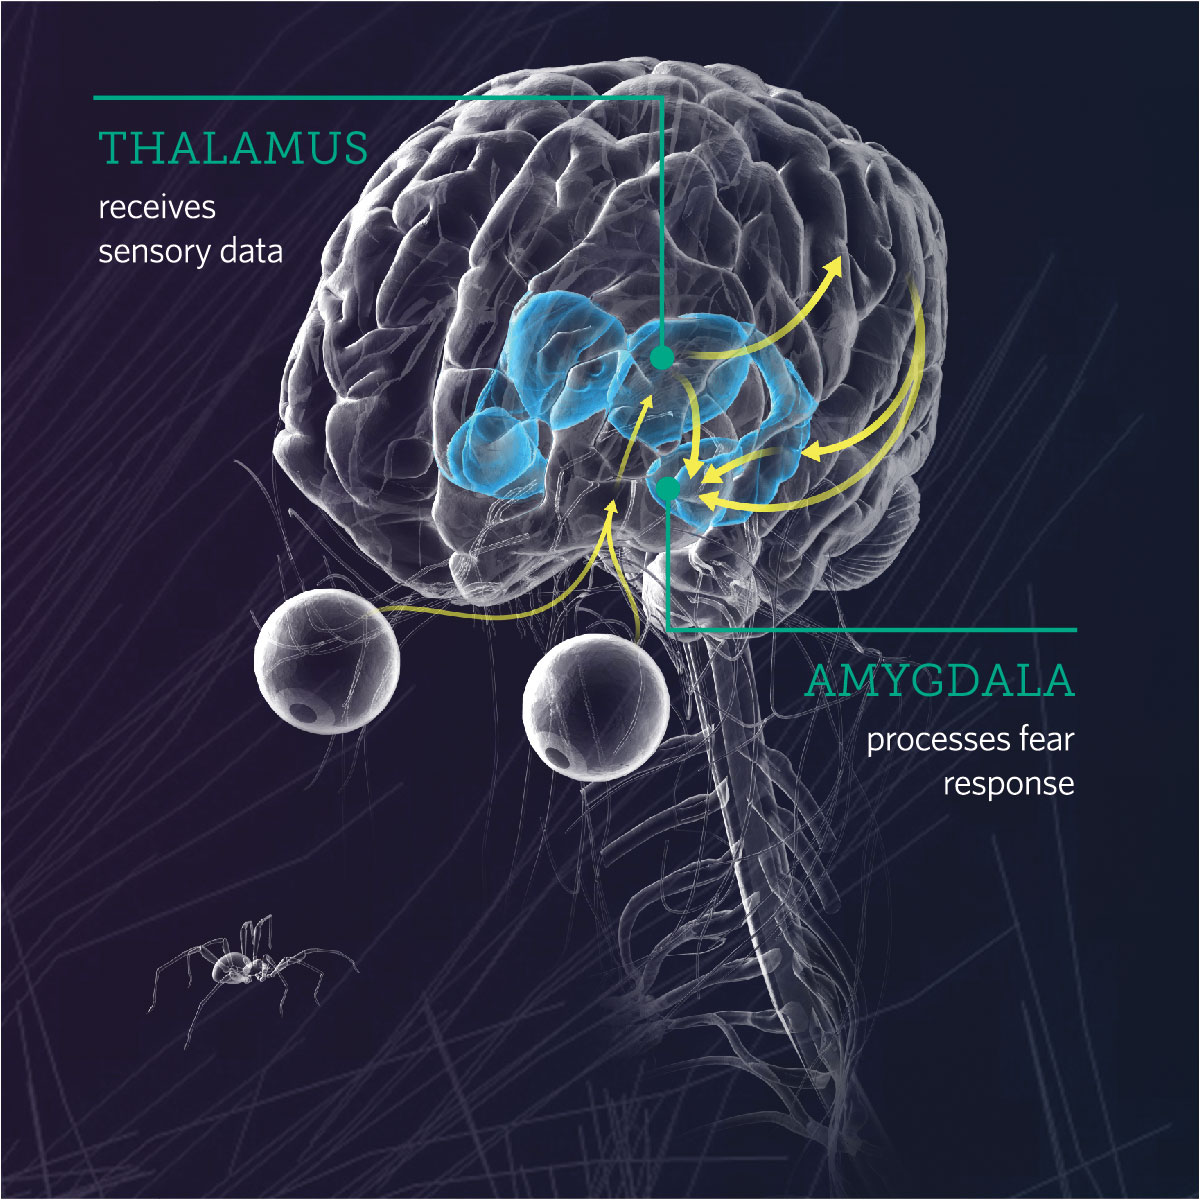 Diagram of the human brain showing locations of the thalamus and amygdala